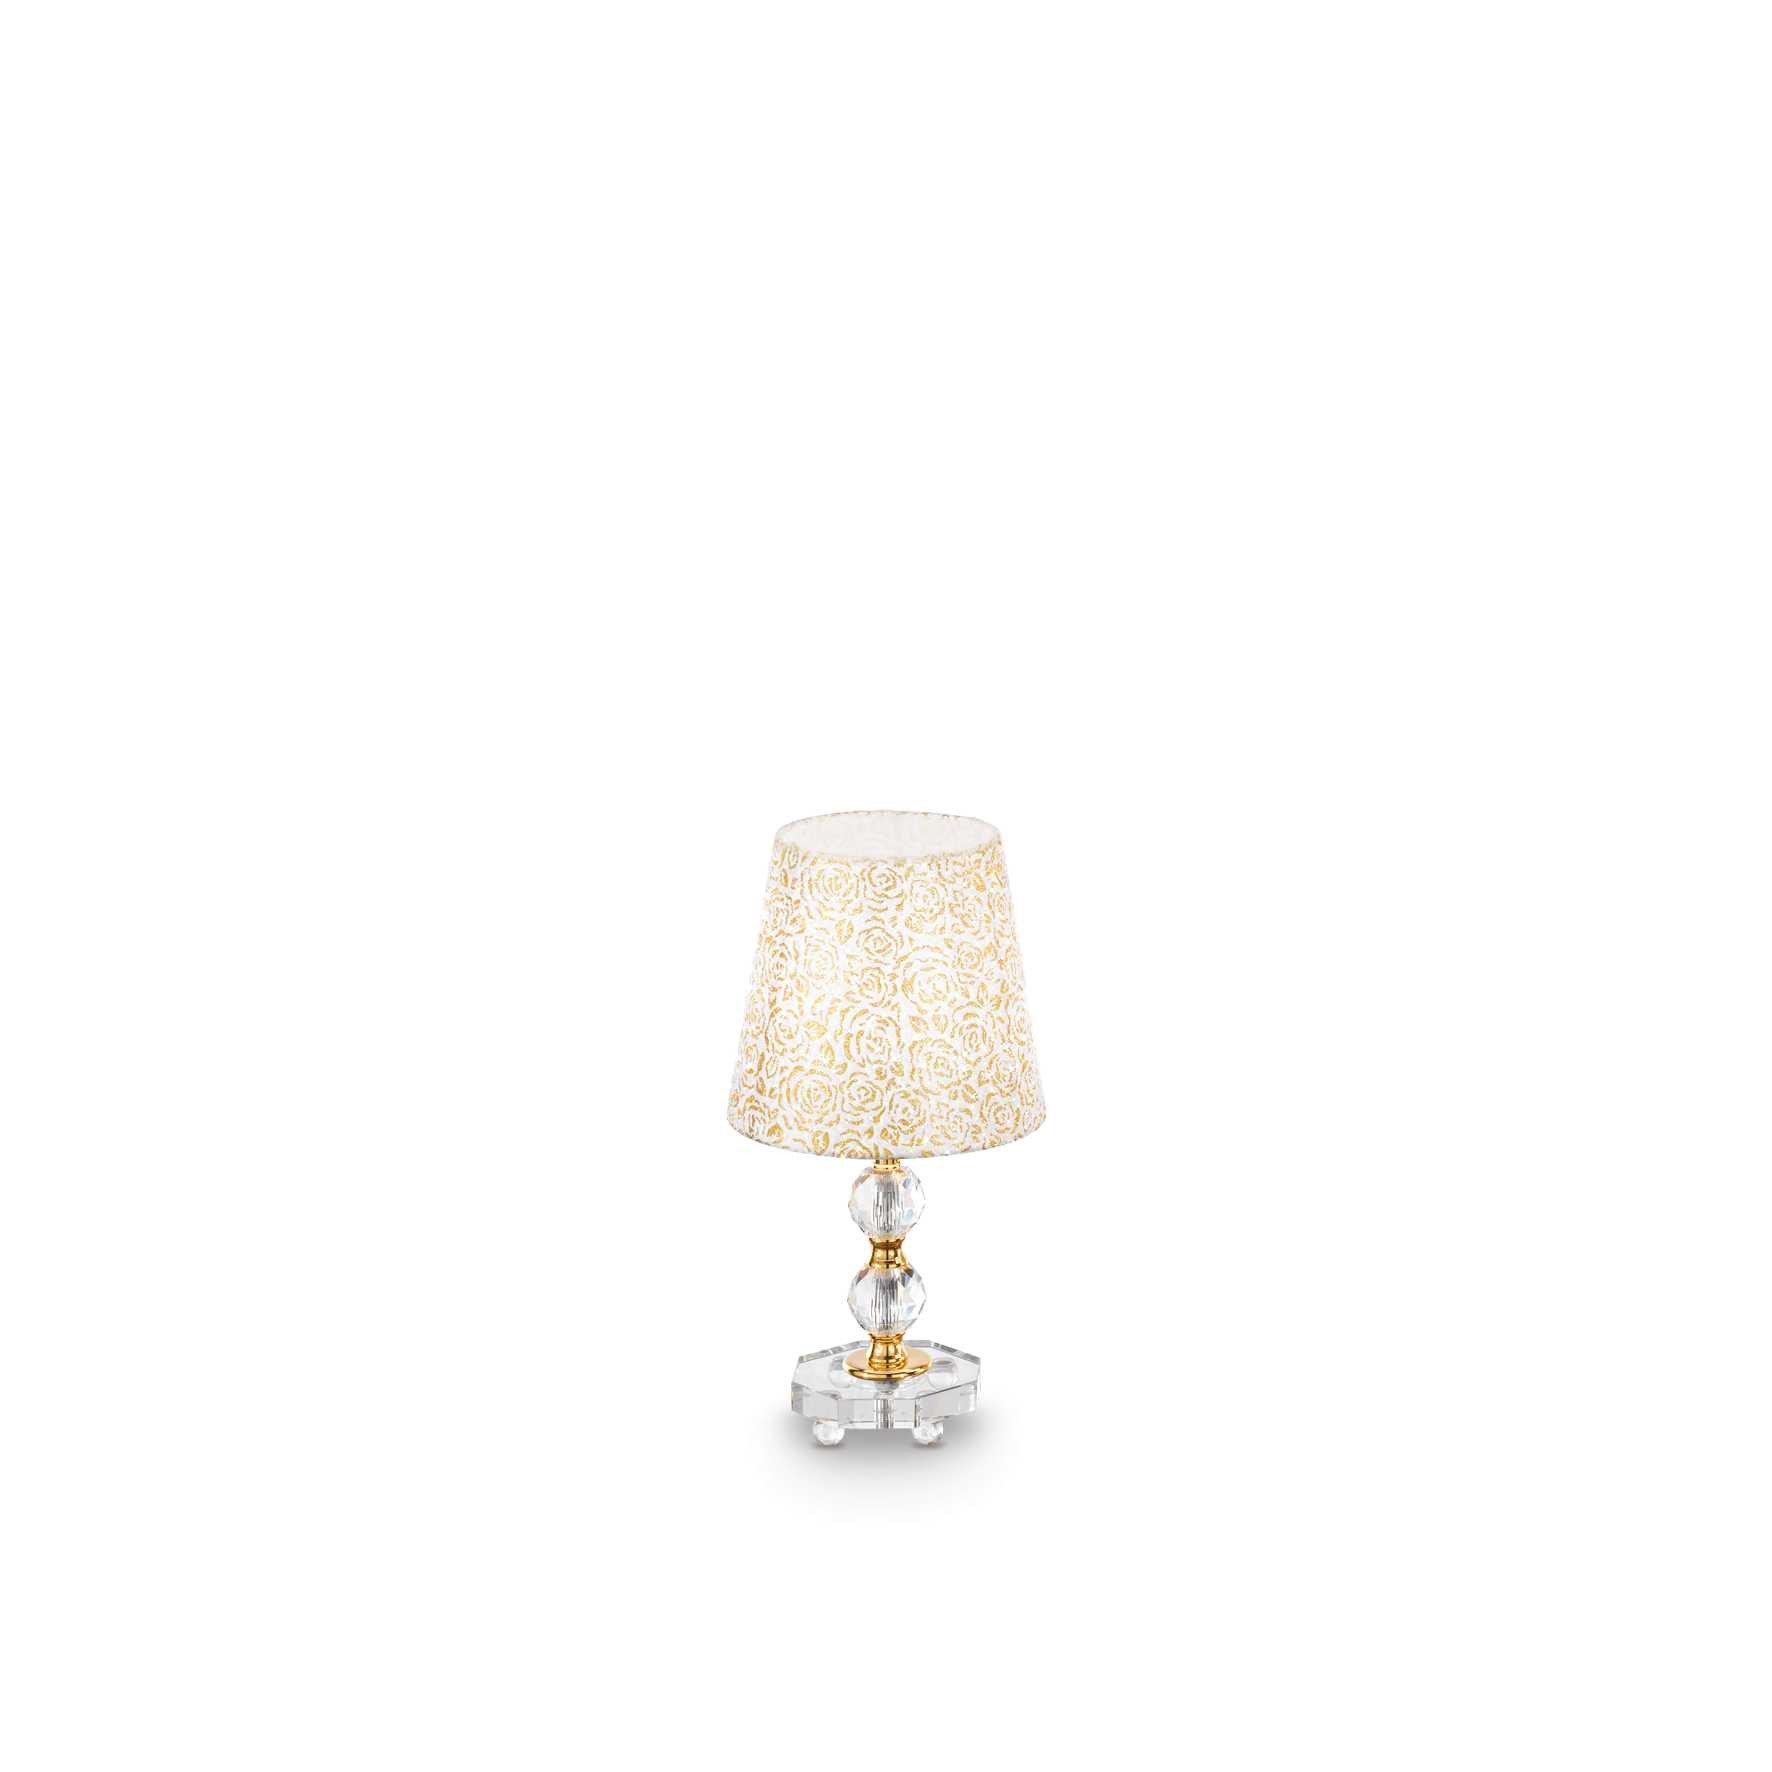 Queen 1 Light Small Table Lamp Gold with Glass Decoration E27